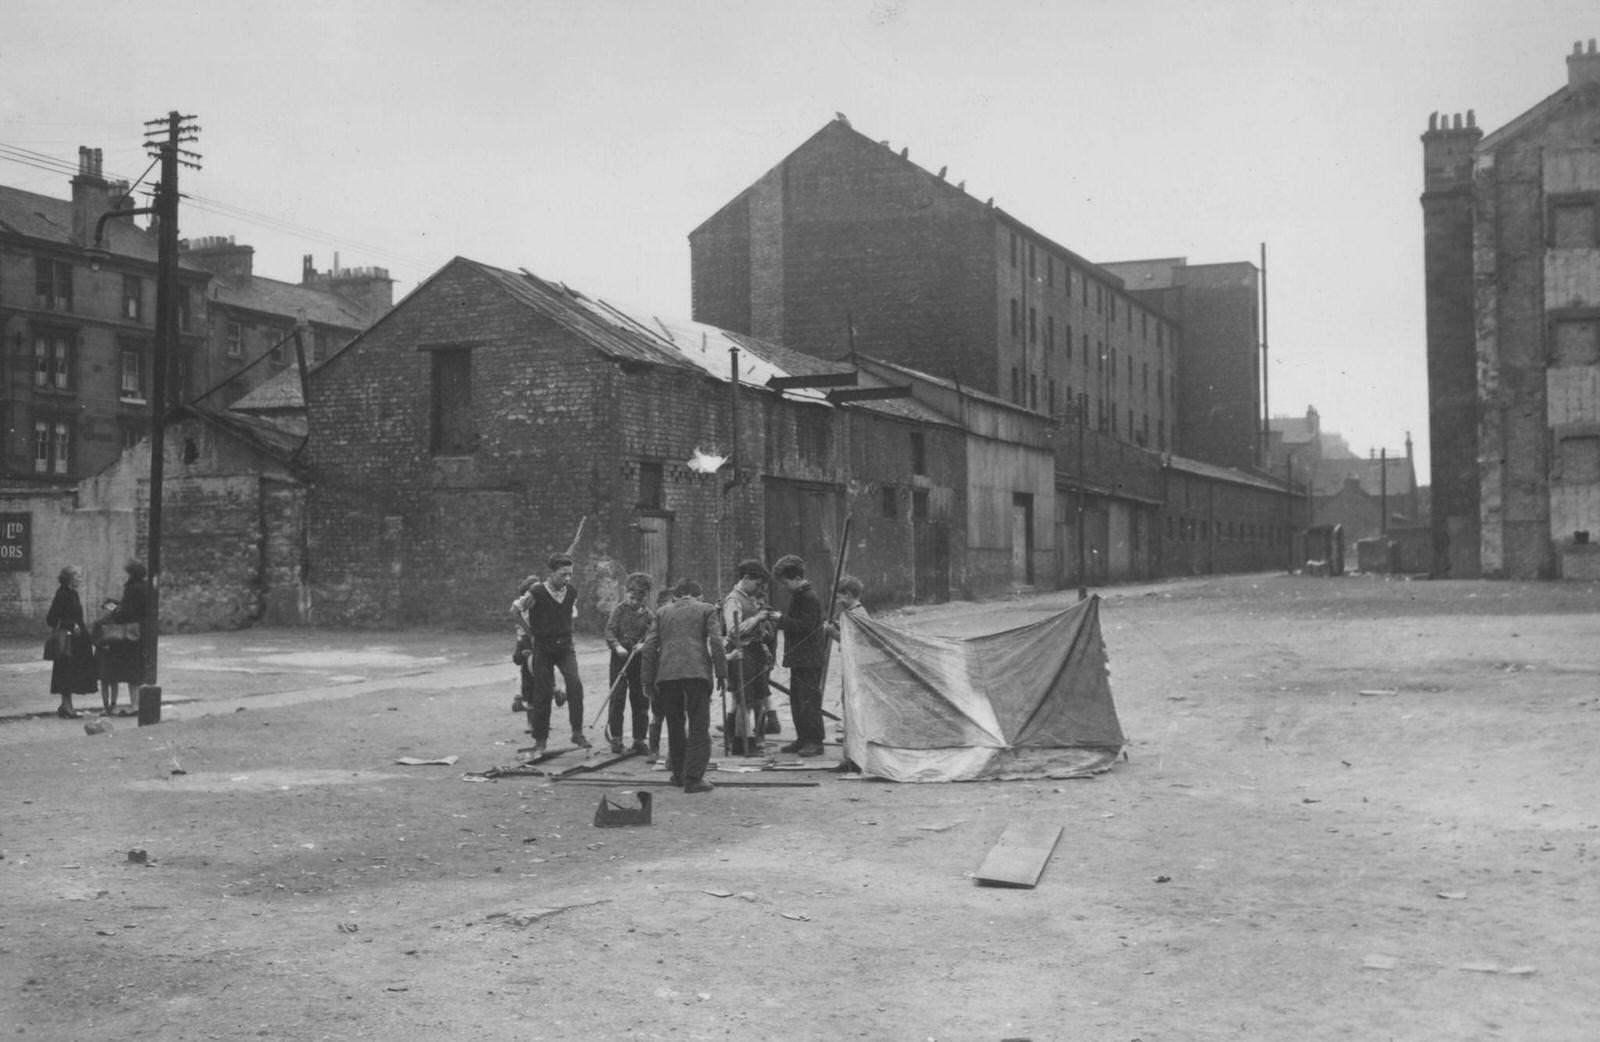 Children playing in Surrey Lane in the Gorbals area of Glasgow, 1956